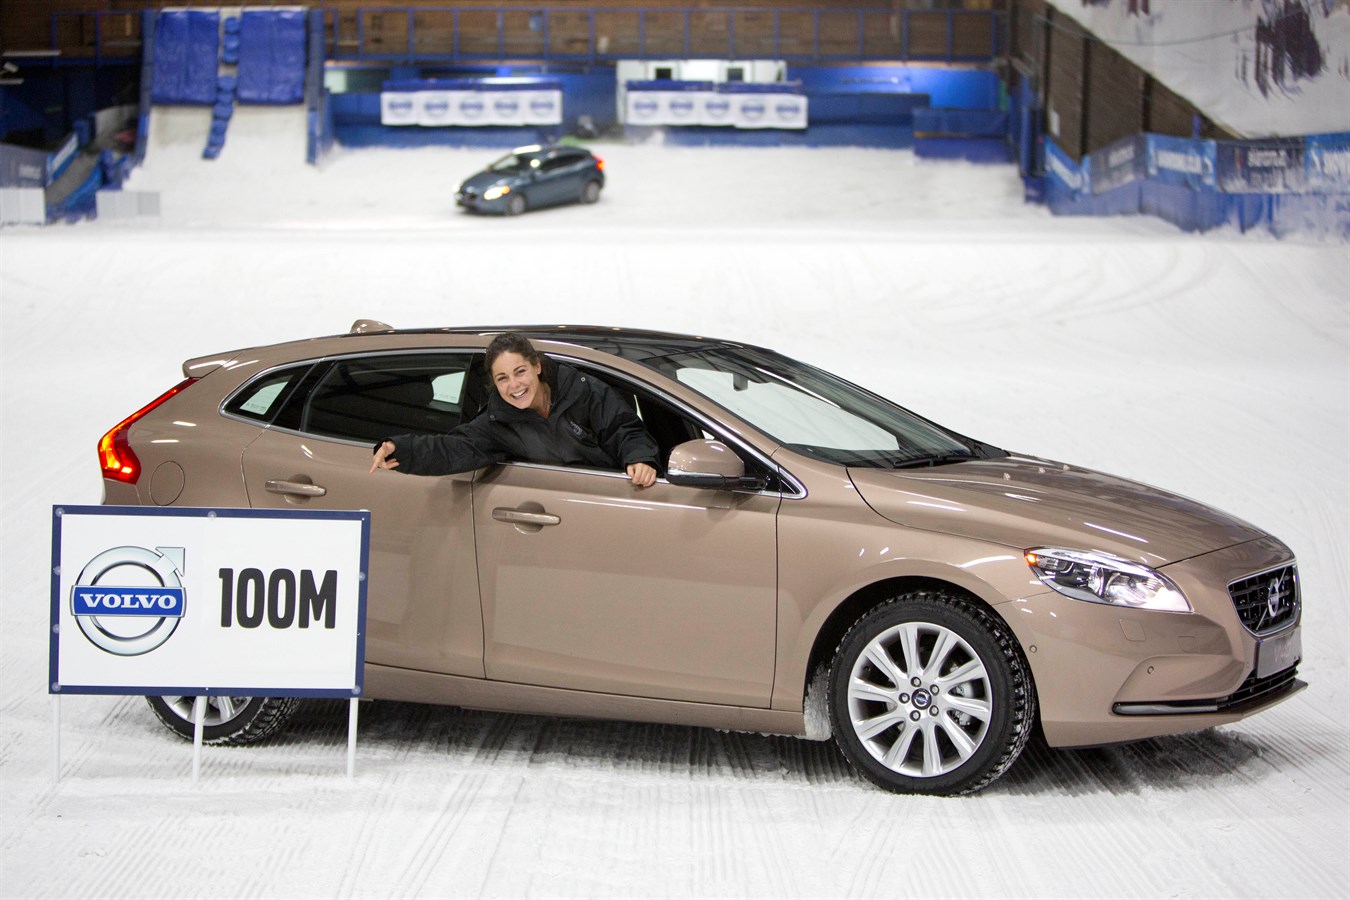 Louise Thompson, star of TV's Made in Chelsea demonstrates the advantages of winter tyres for driving in snow